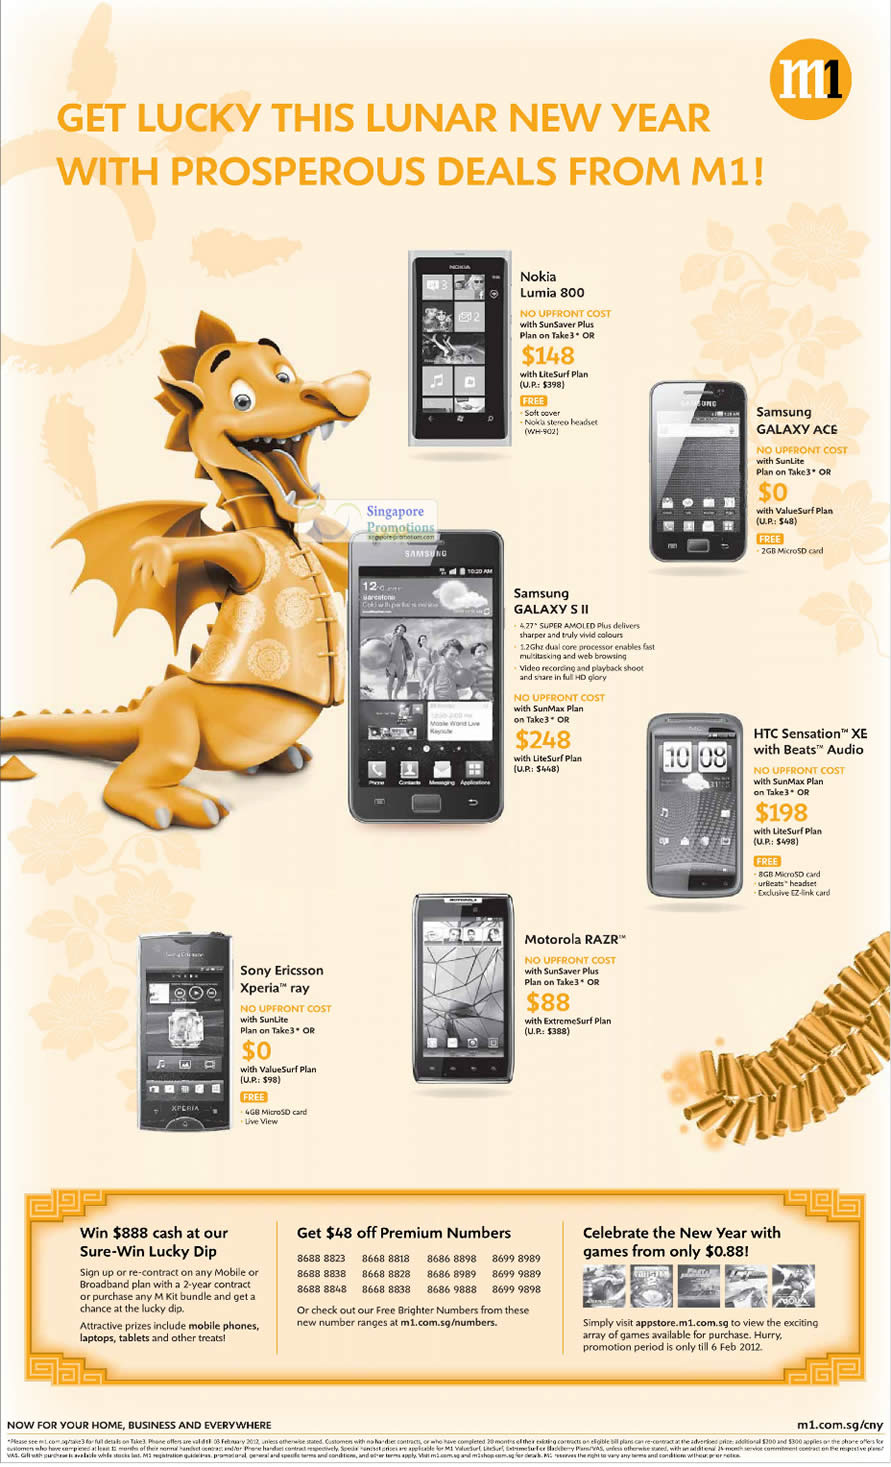 Featured image for M1 Smartphones, Tablets & Home/Mobile Broadband Offers 28 Jan - 3 Feb 2012